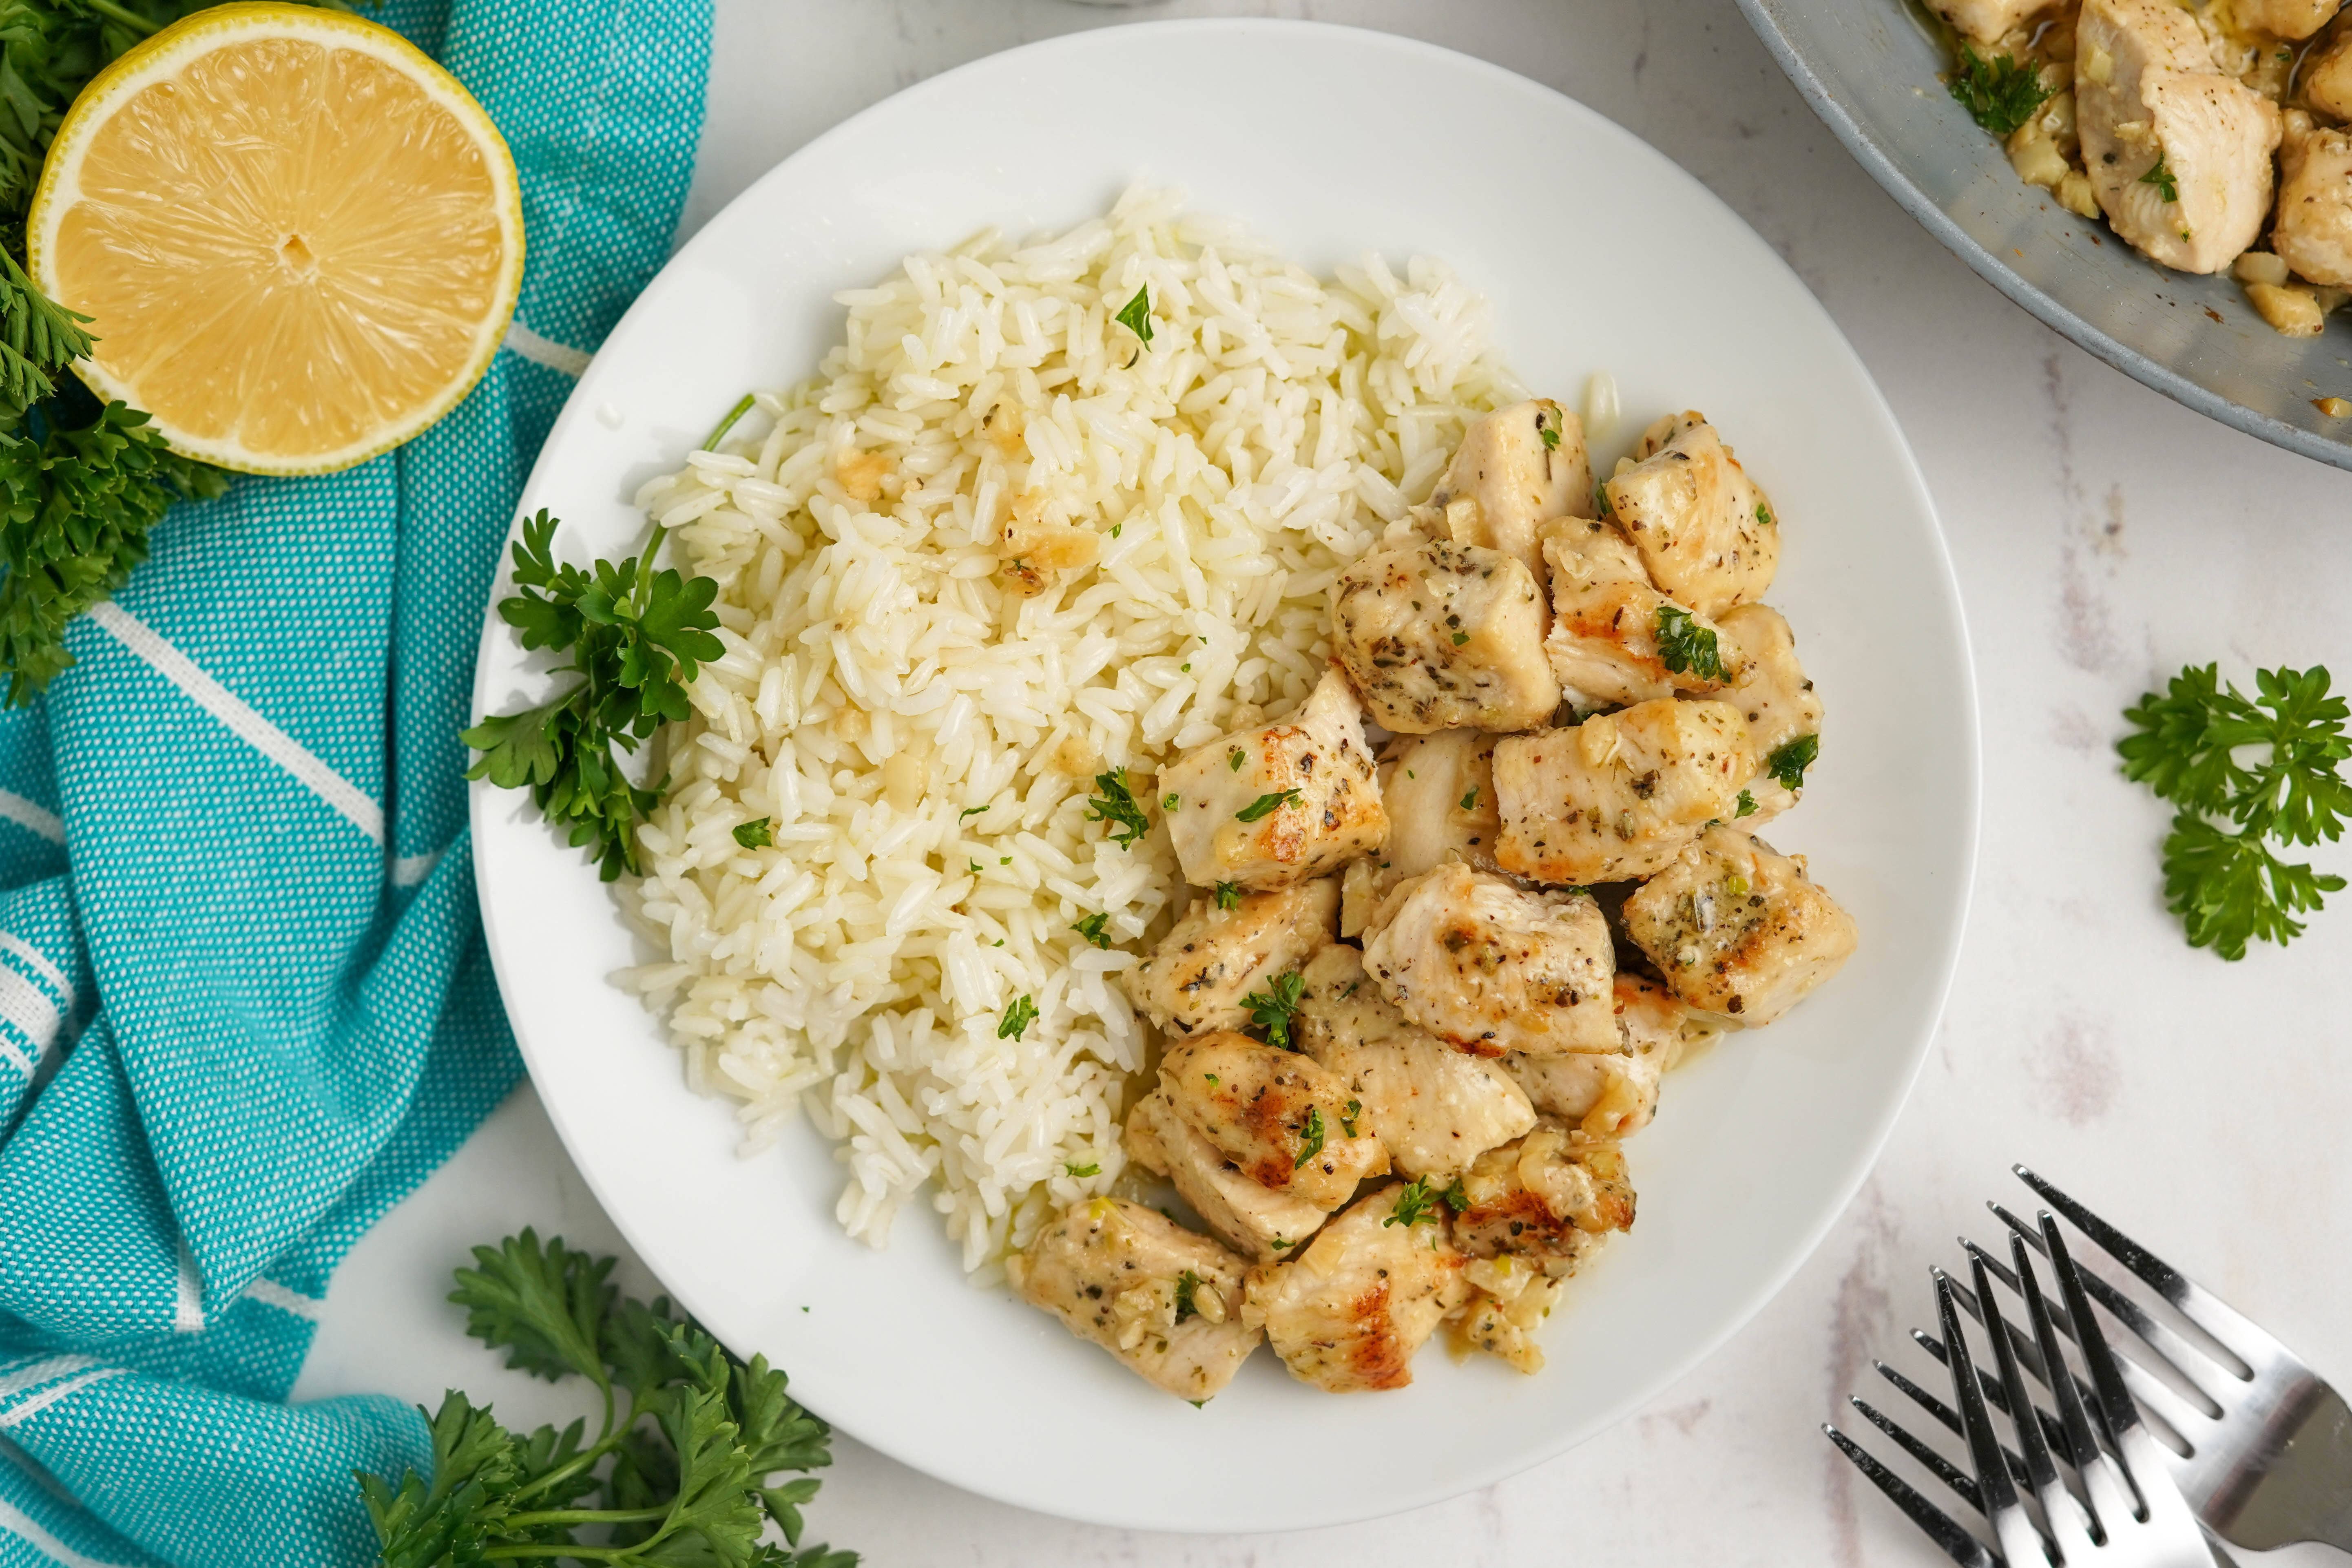 garlic chicken bites and rice on a plate